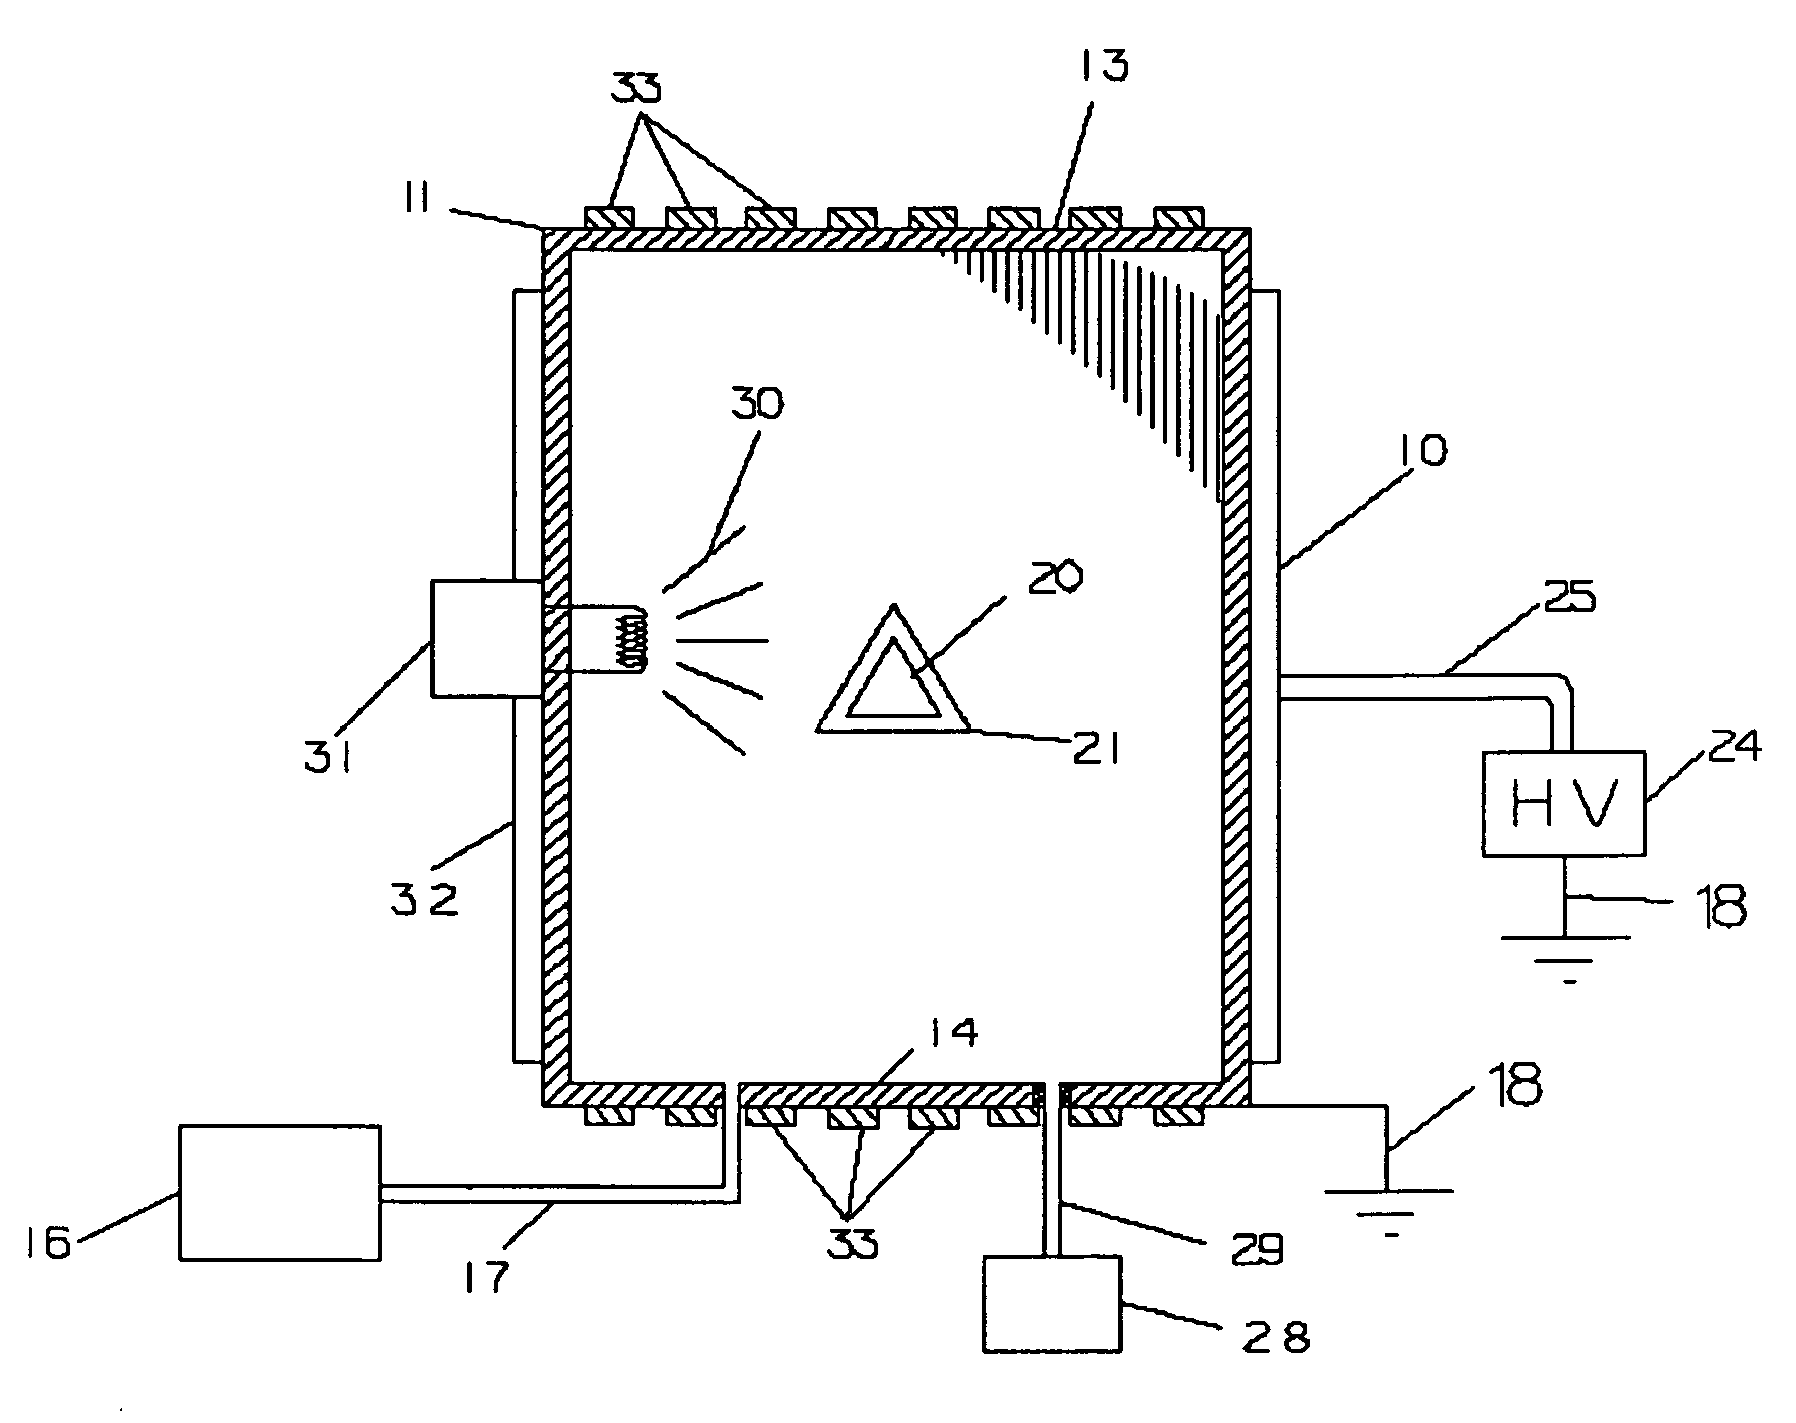 Method and apparatus for plasma source ion implantation in metals and non-metals